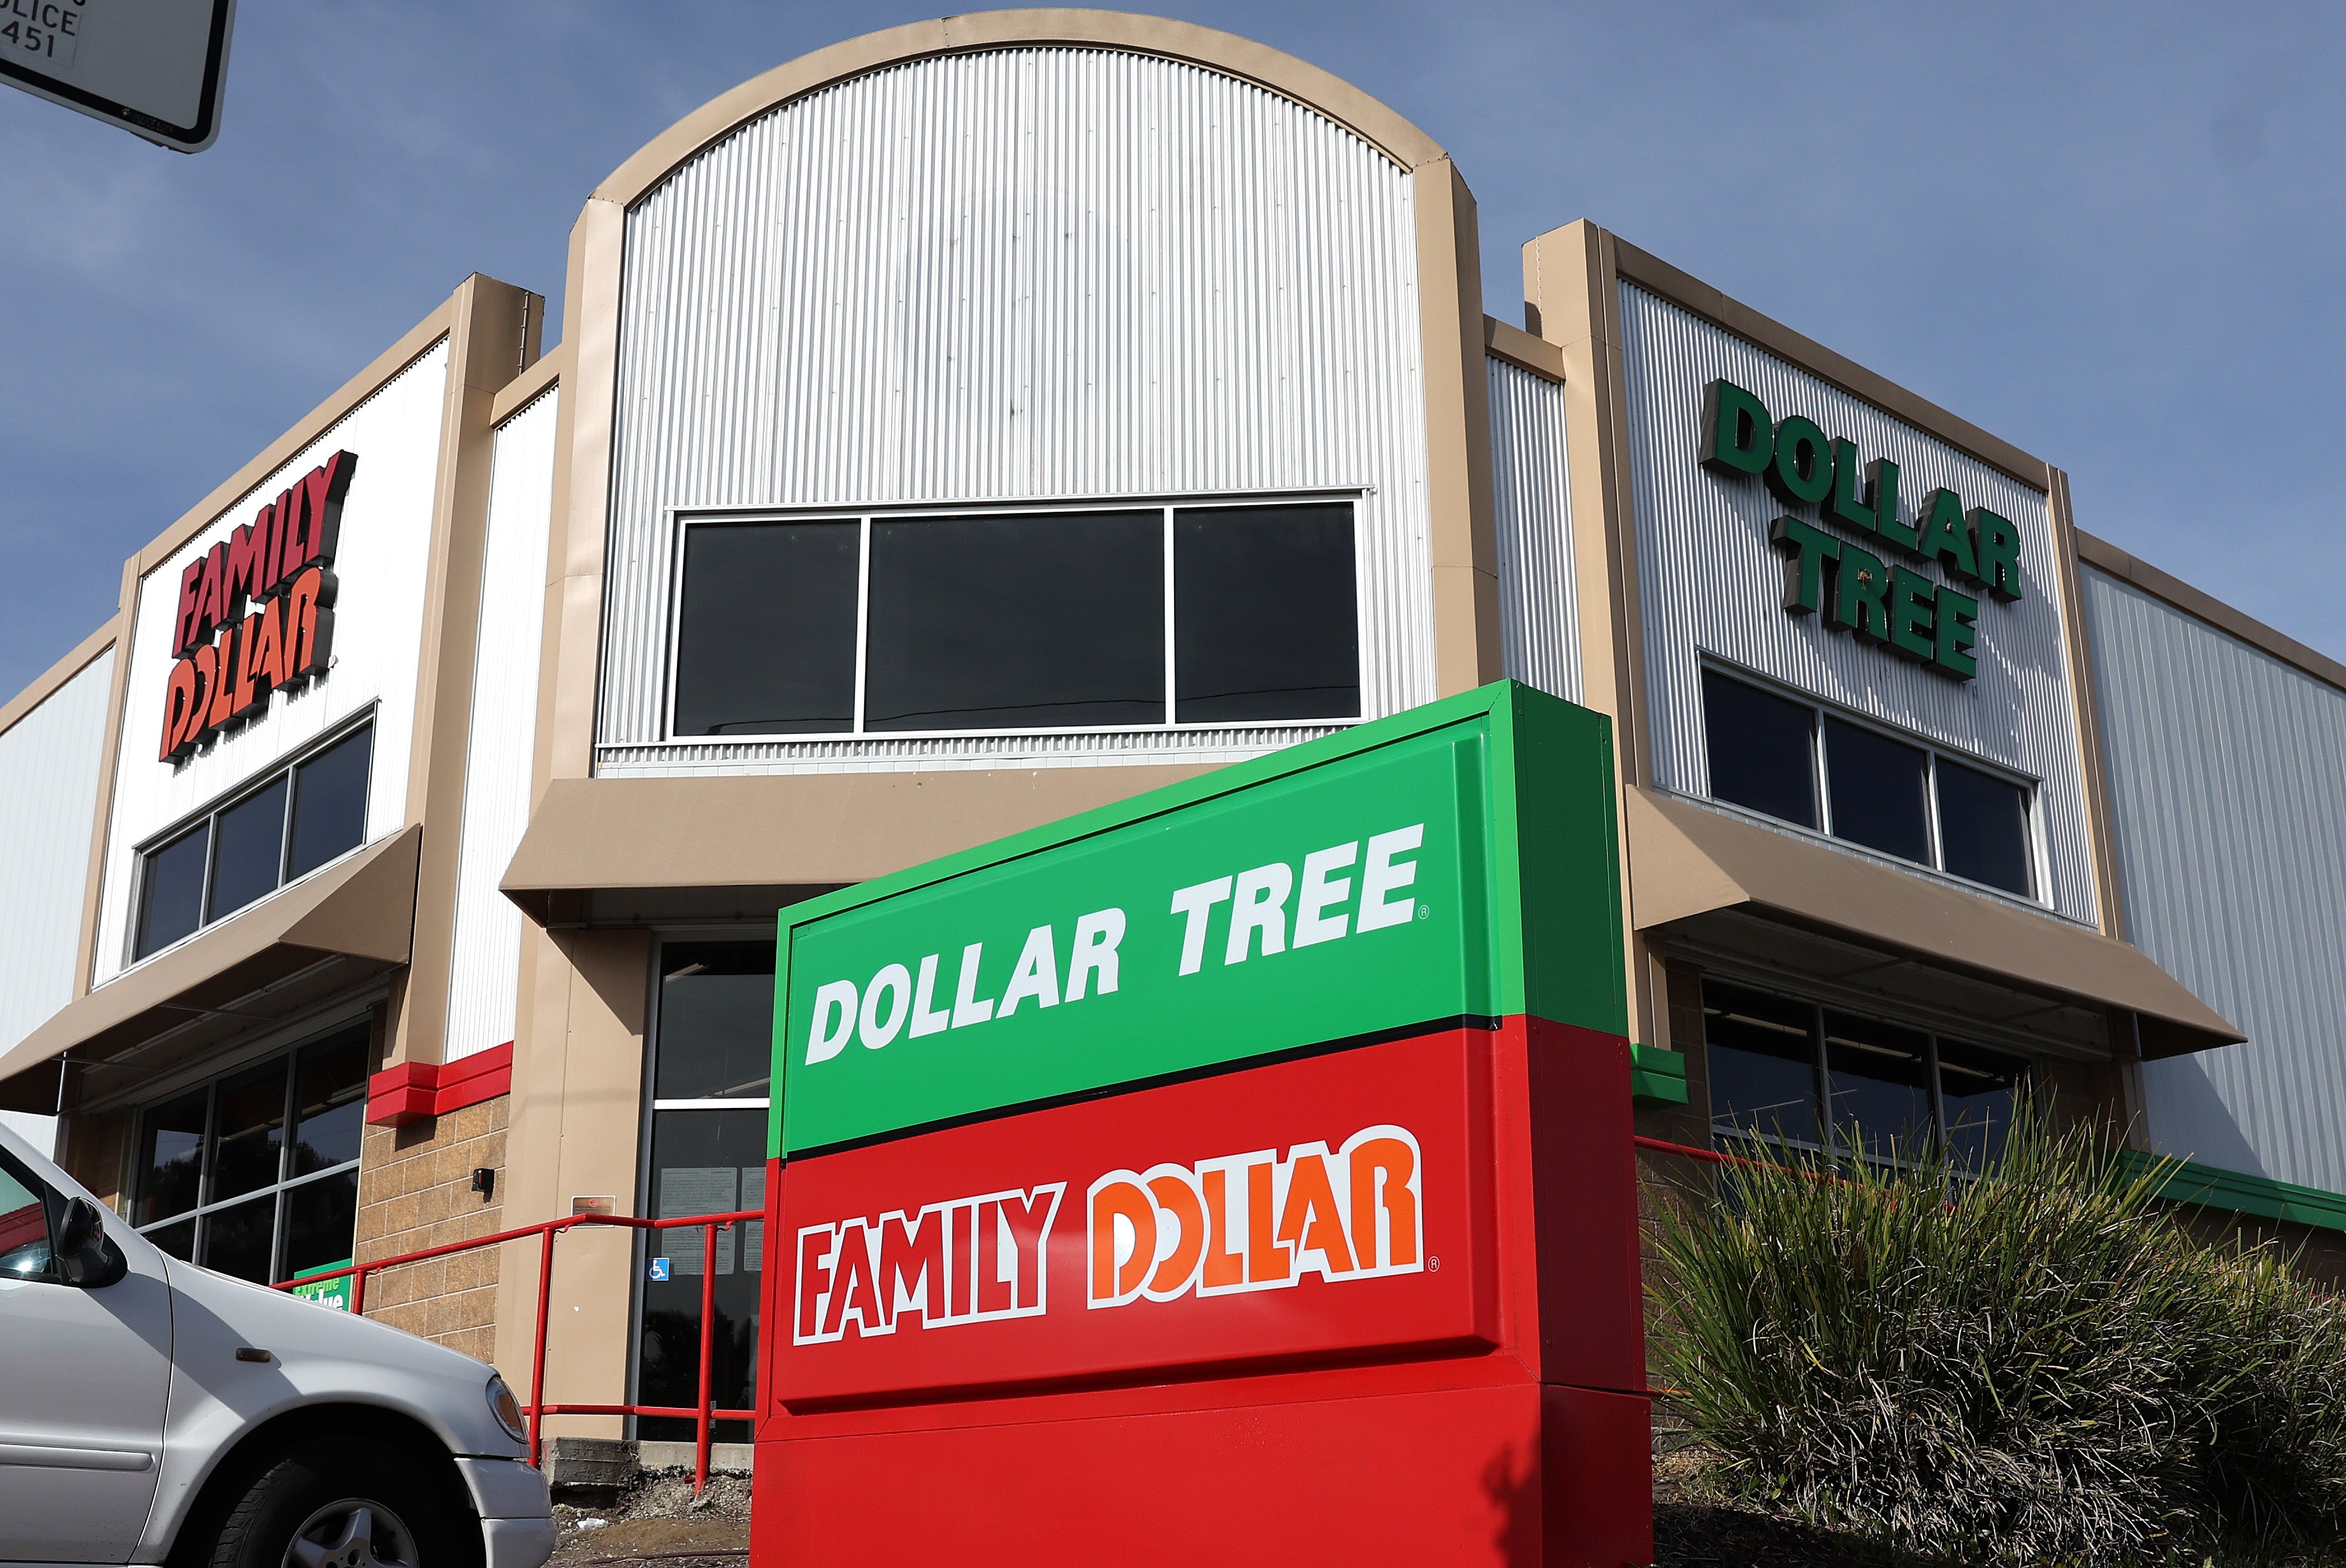 Dollar Tree announced plans to close nearly 1,000 of its underperforming Family Dollar stores across the US in March